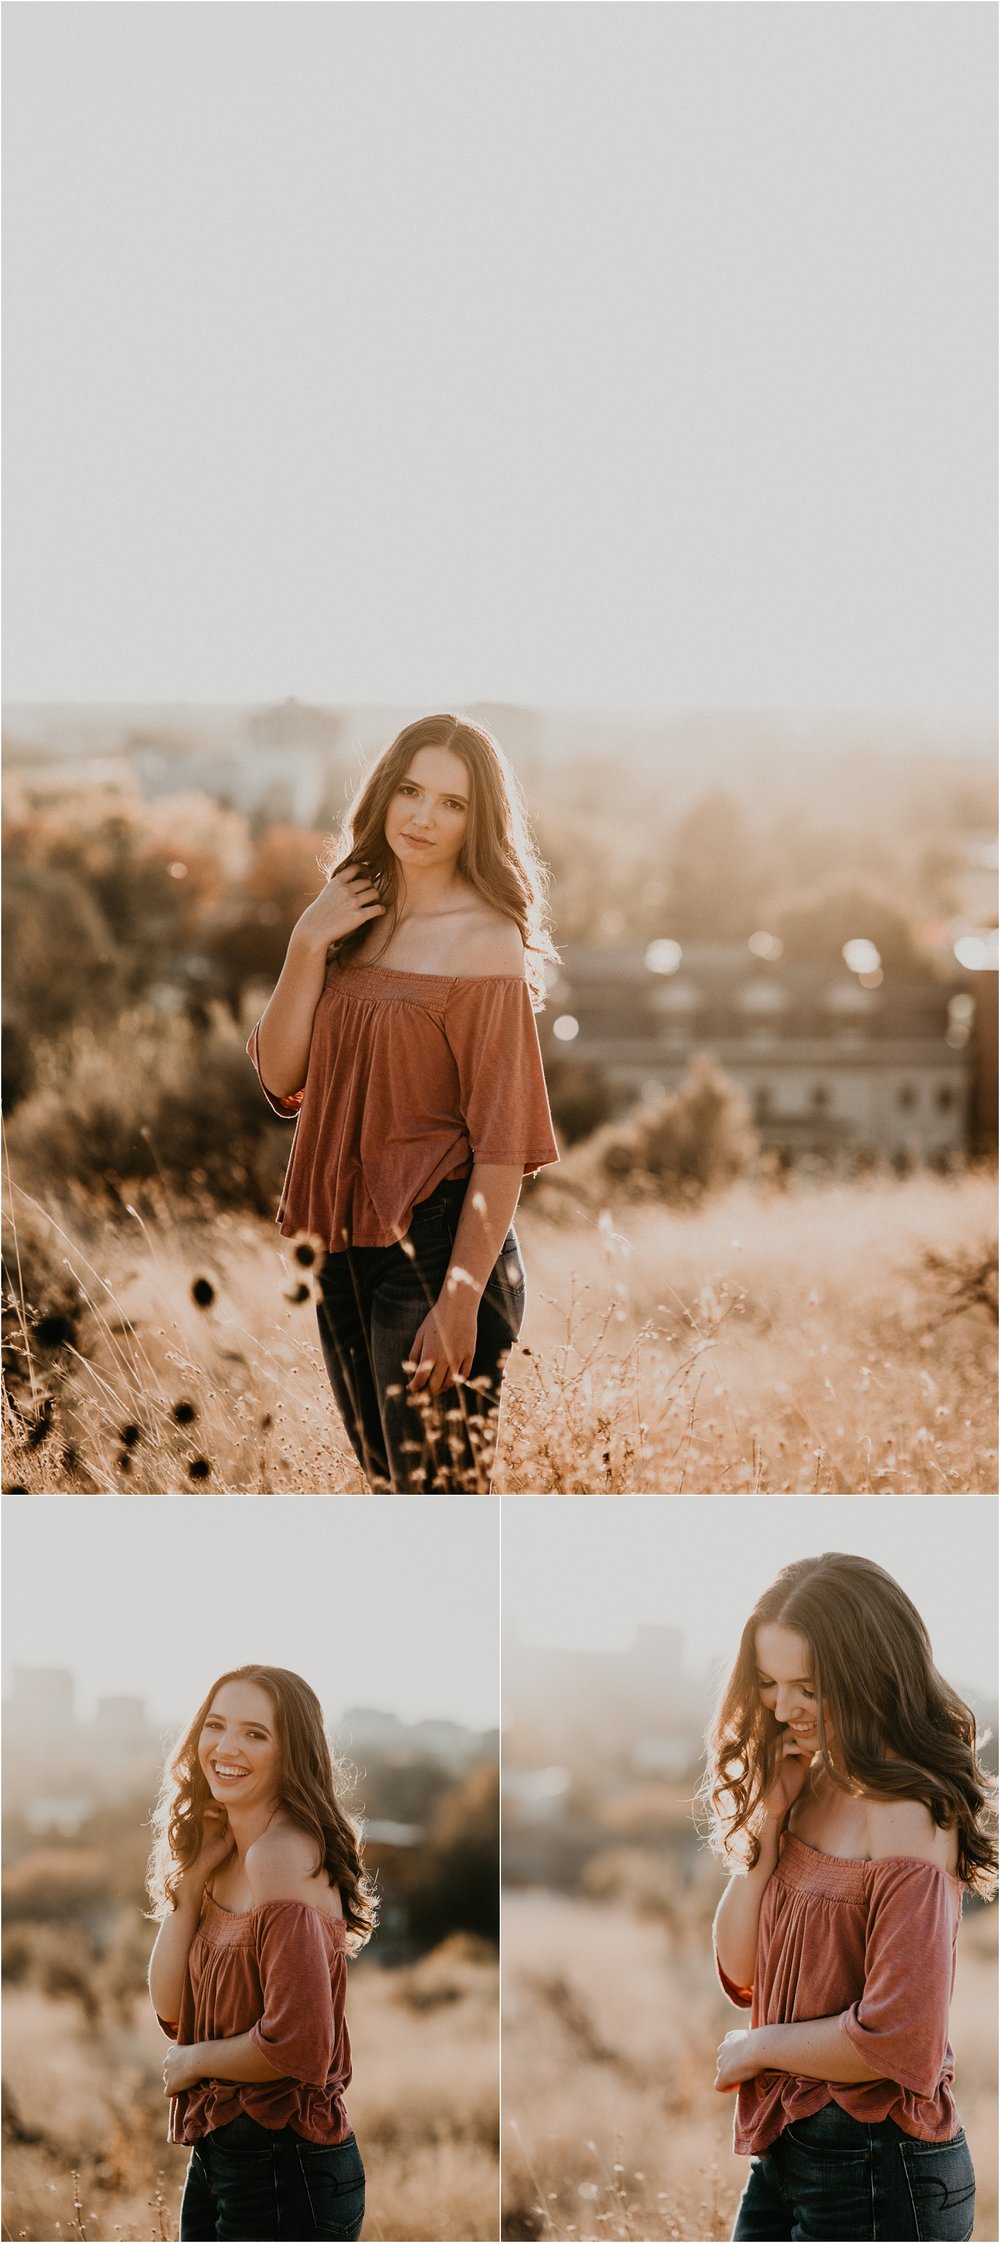 Boise Senior Photographer Makayla Madden Photography Downtown Boise Senior Pictures Boise Foothills Senior Outfit Locations Raw Real Natural Candid Moments Fall meridian senior photographer